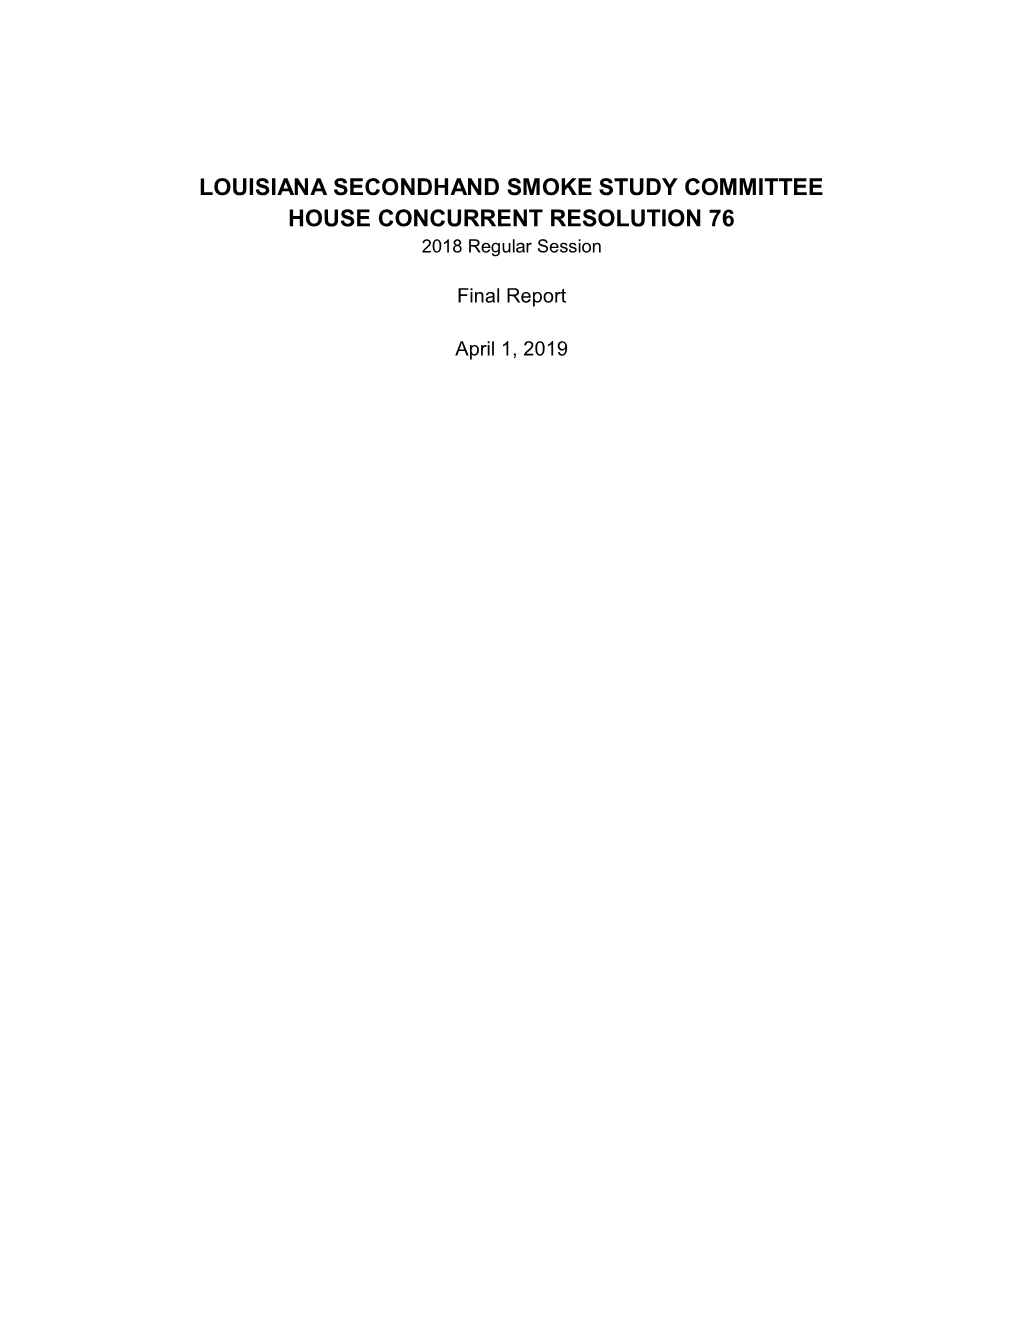 LOUISIANA SECONDHAND SMOKE STUDY COMMITTEE HOUSE CONCURRENT RESOLUTION 76 2018 Regular Session